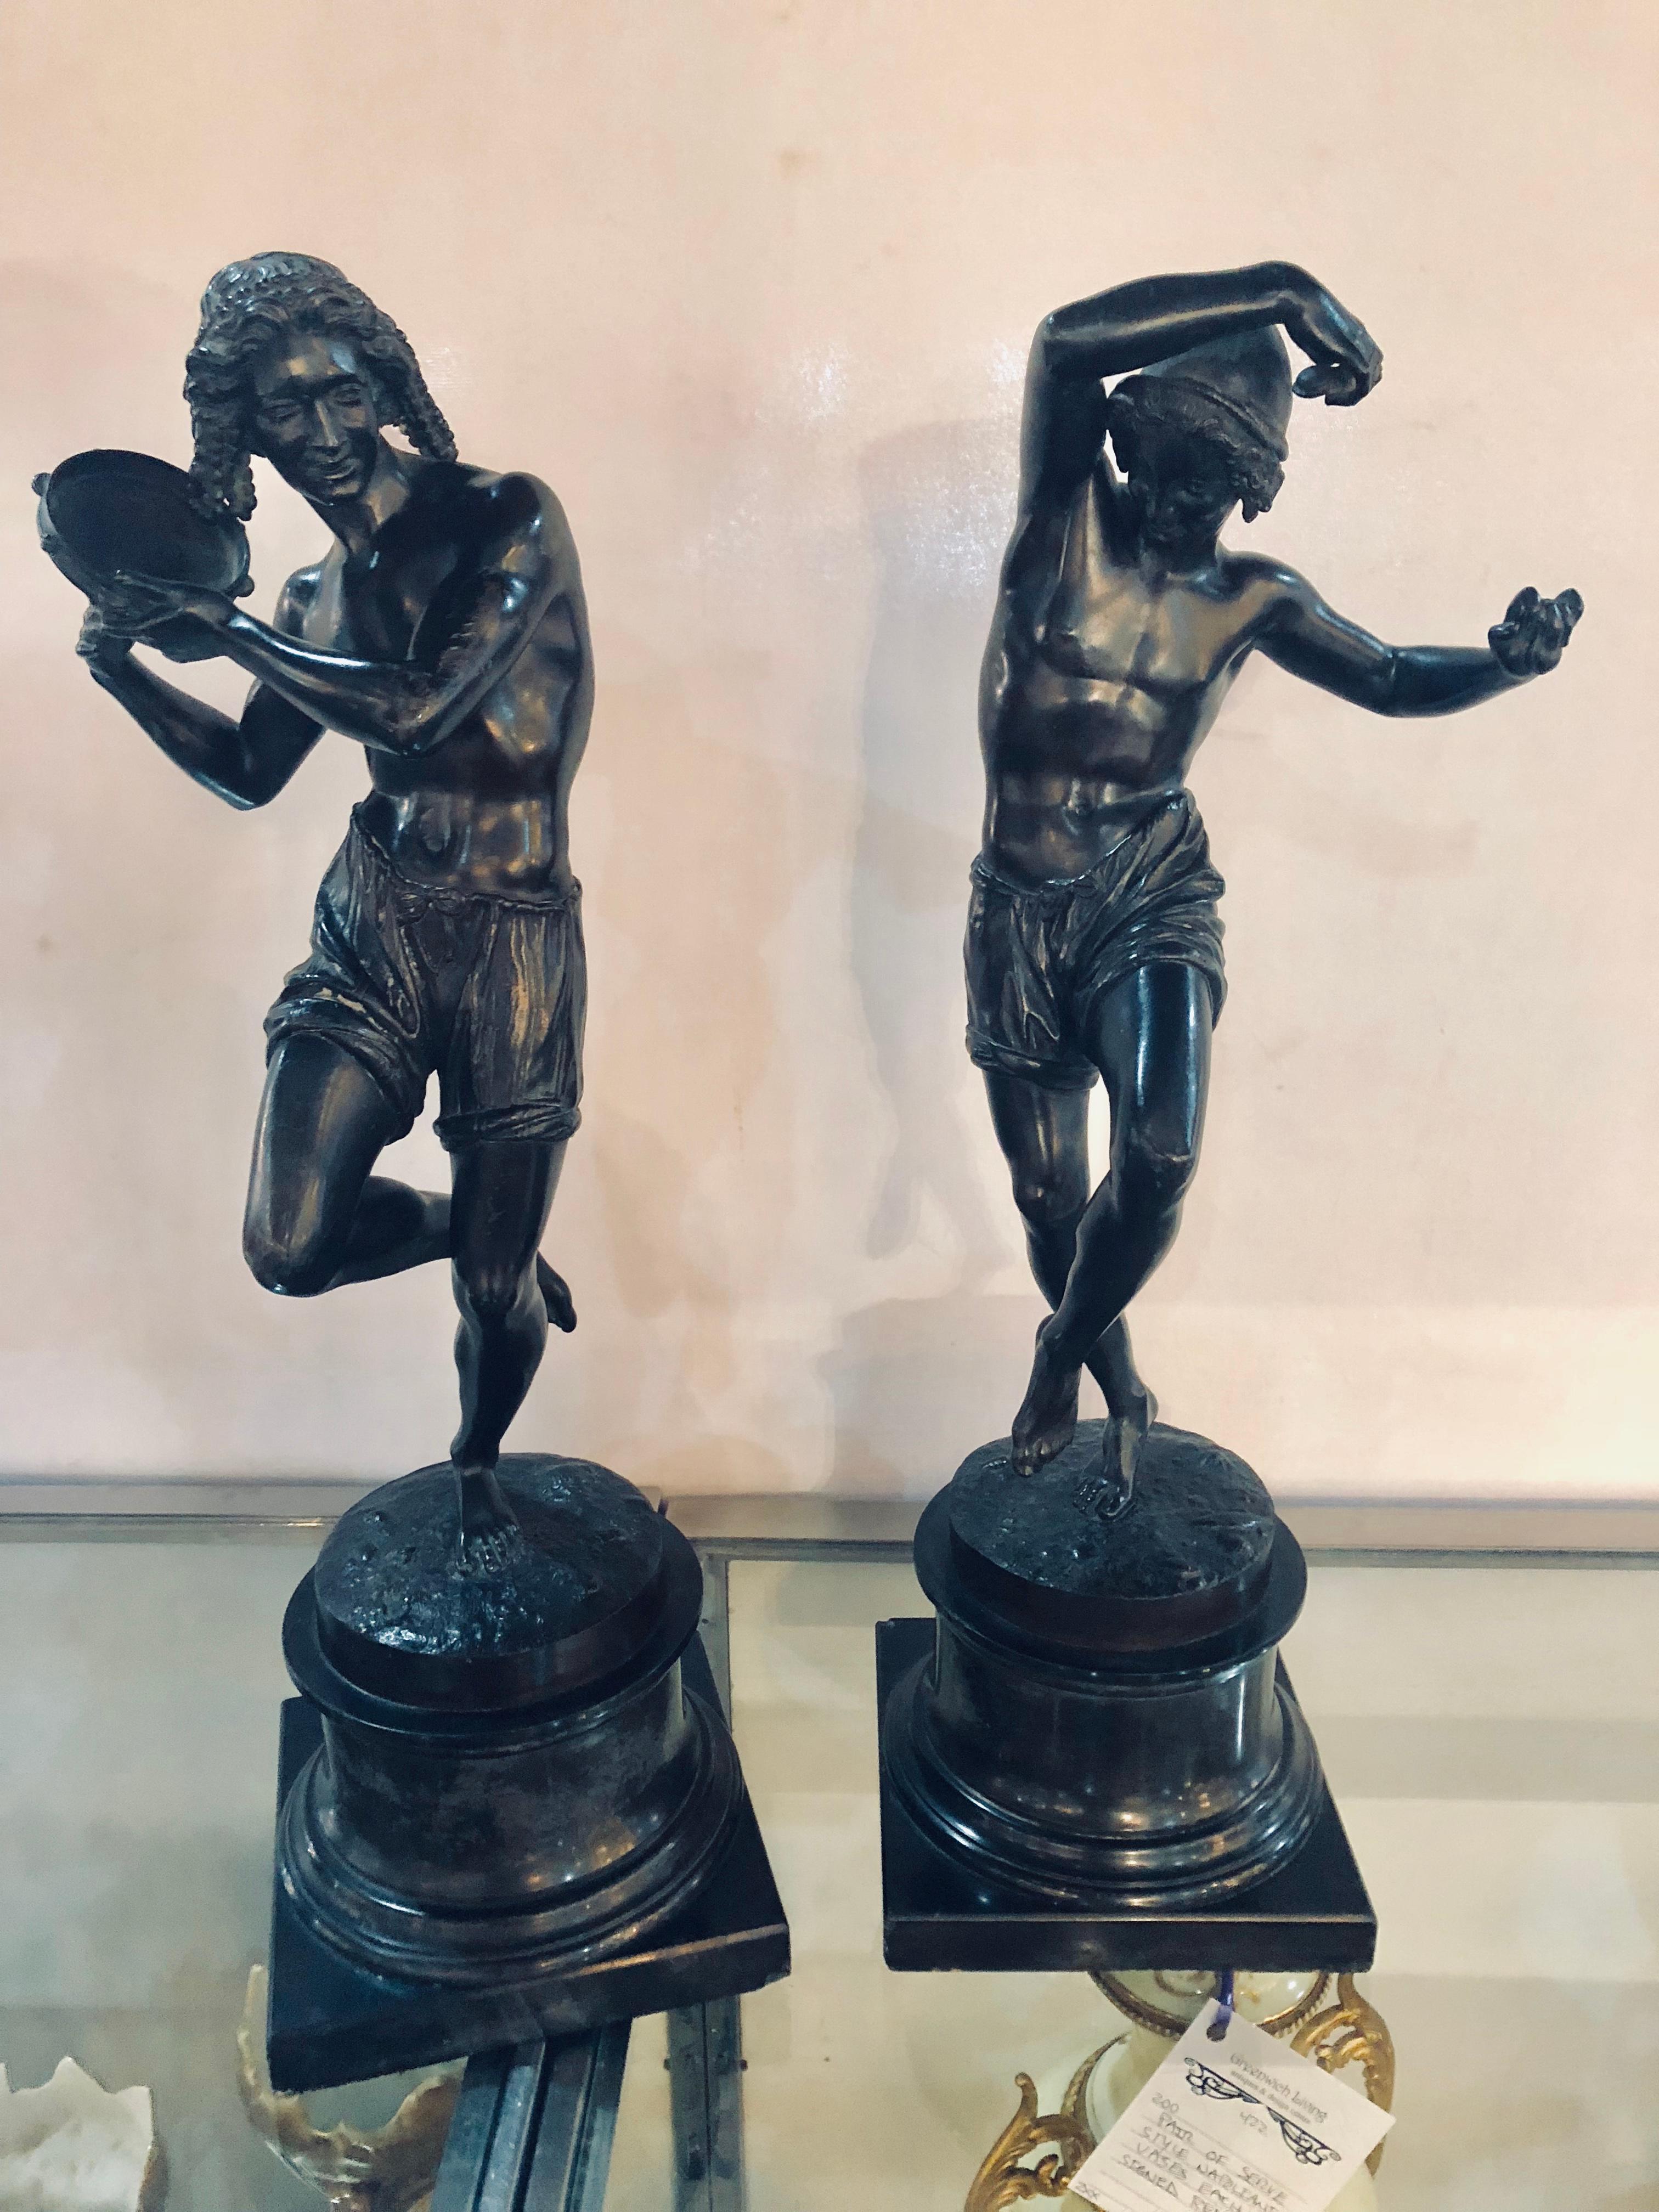 Pair of patinated bronze figures of male dancers signed Duret, Neapolitan fisher dancing the Tarantella, 1833 and Delafontaine. Each mounted on a truncated marble pedestal. Height overall 21 1/2 inches, height of figures 17 inches. Figure with